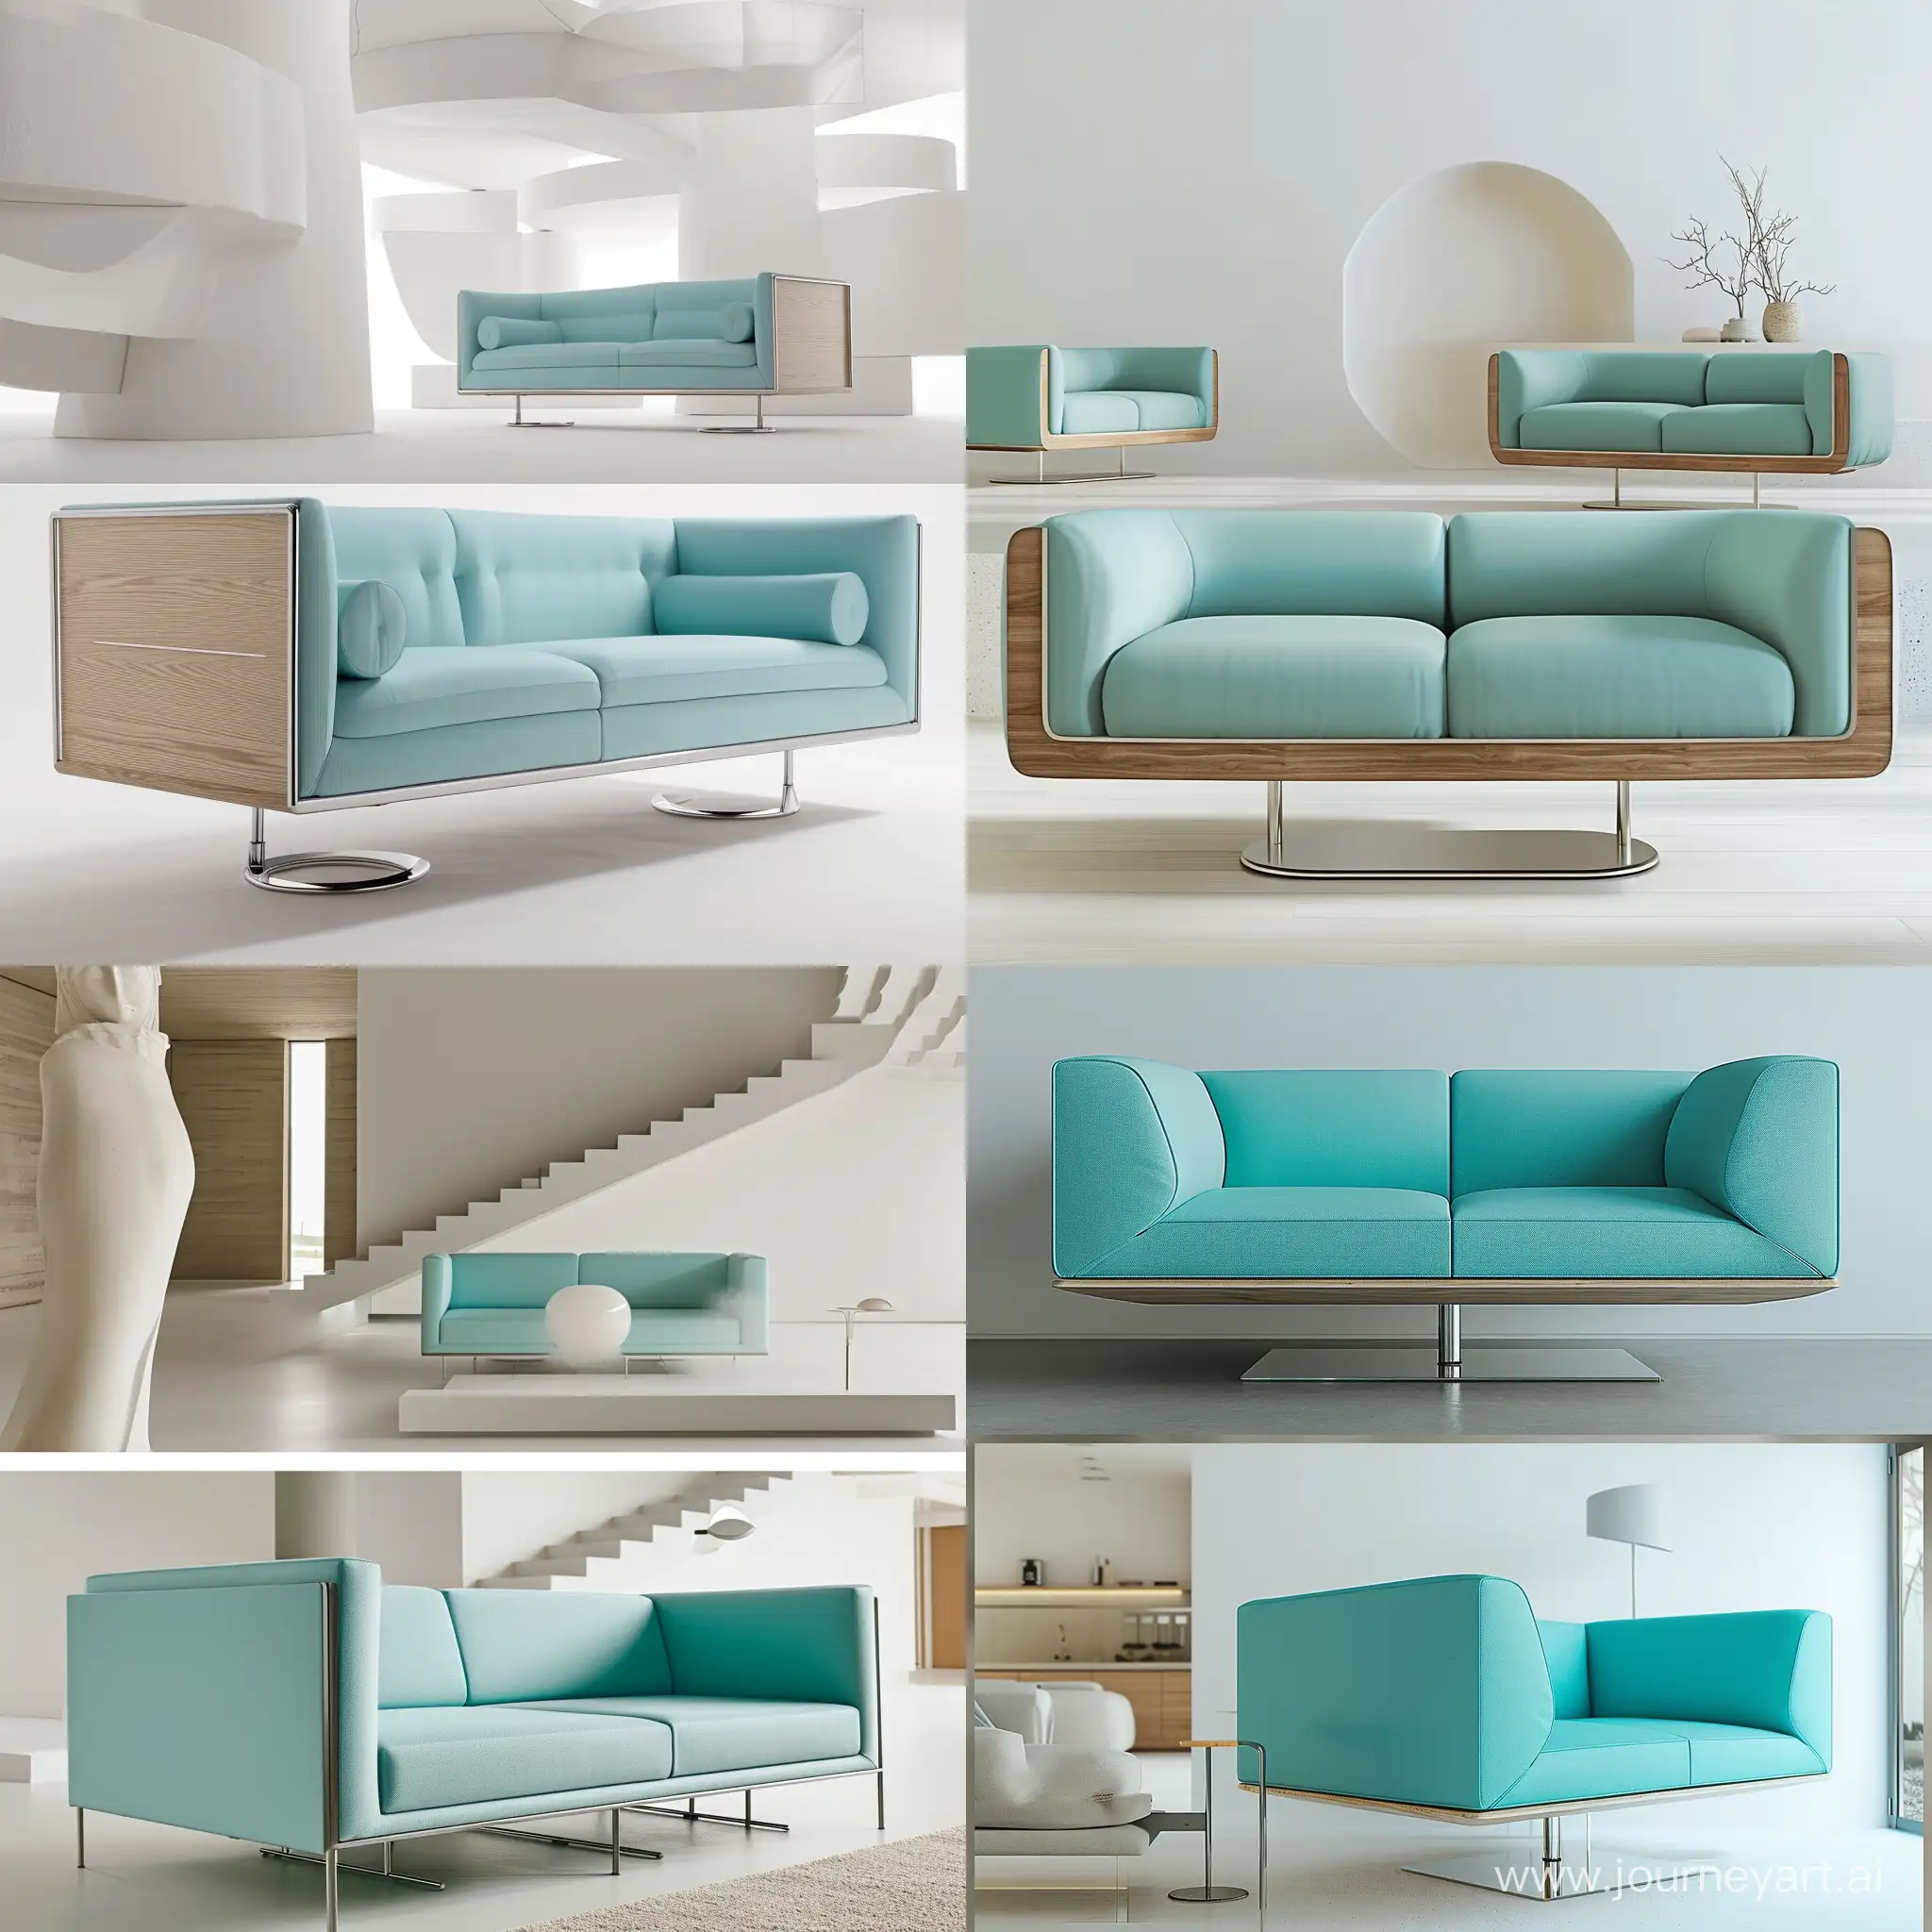 Design a modern and minimal sofa. The cover of this sofa must be made of beech wood. The bases are metal and inspired by Herman Miller's design style. The color of the sofa is Tiffany blue. Take a photo of this sofa in a modern home where white is the predominant color. The photos should be realistic